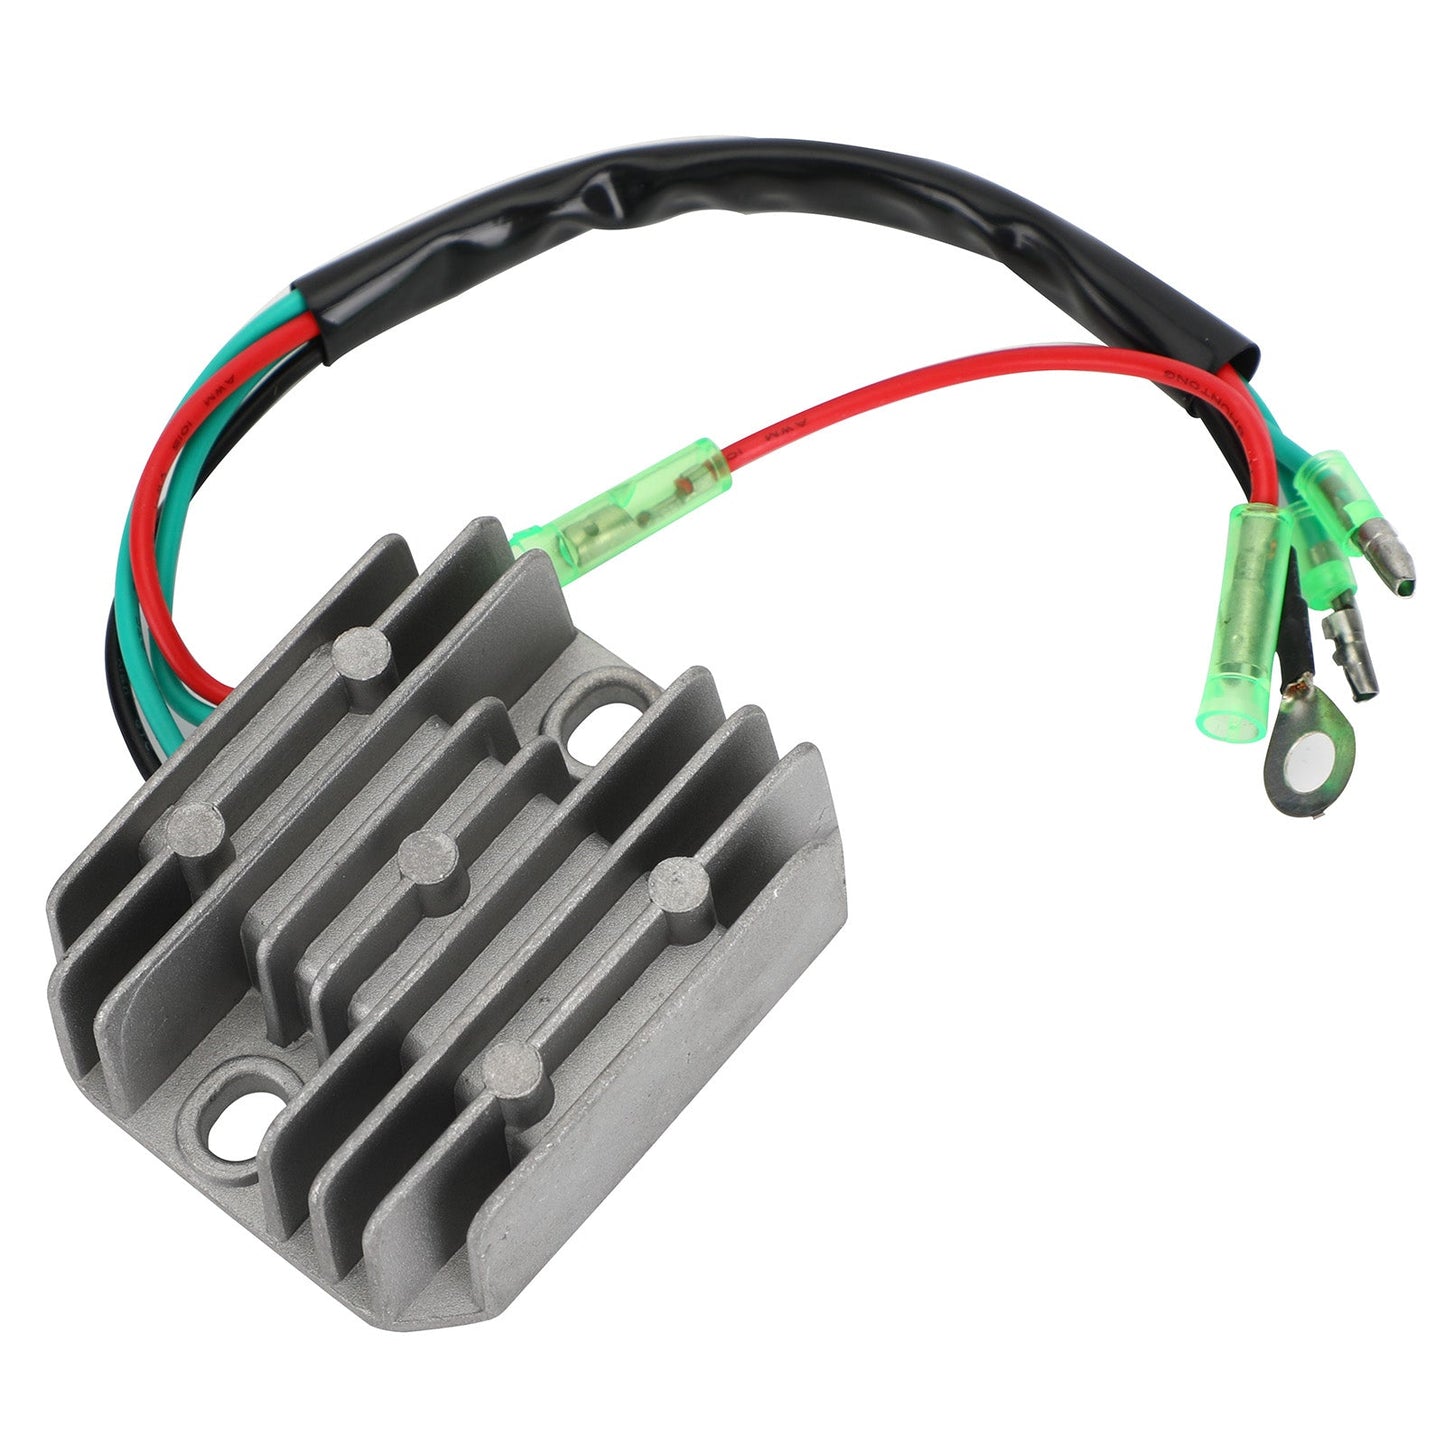 Regulator Rectifier Fit for Yamaha F8 F9.9 F15 Hp Outboard Motor 6G8-81960-A1